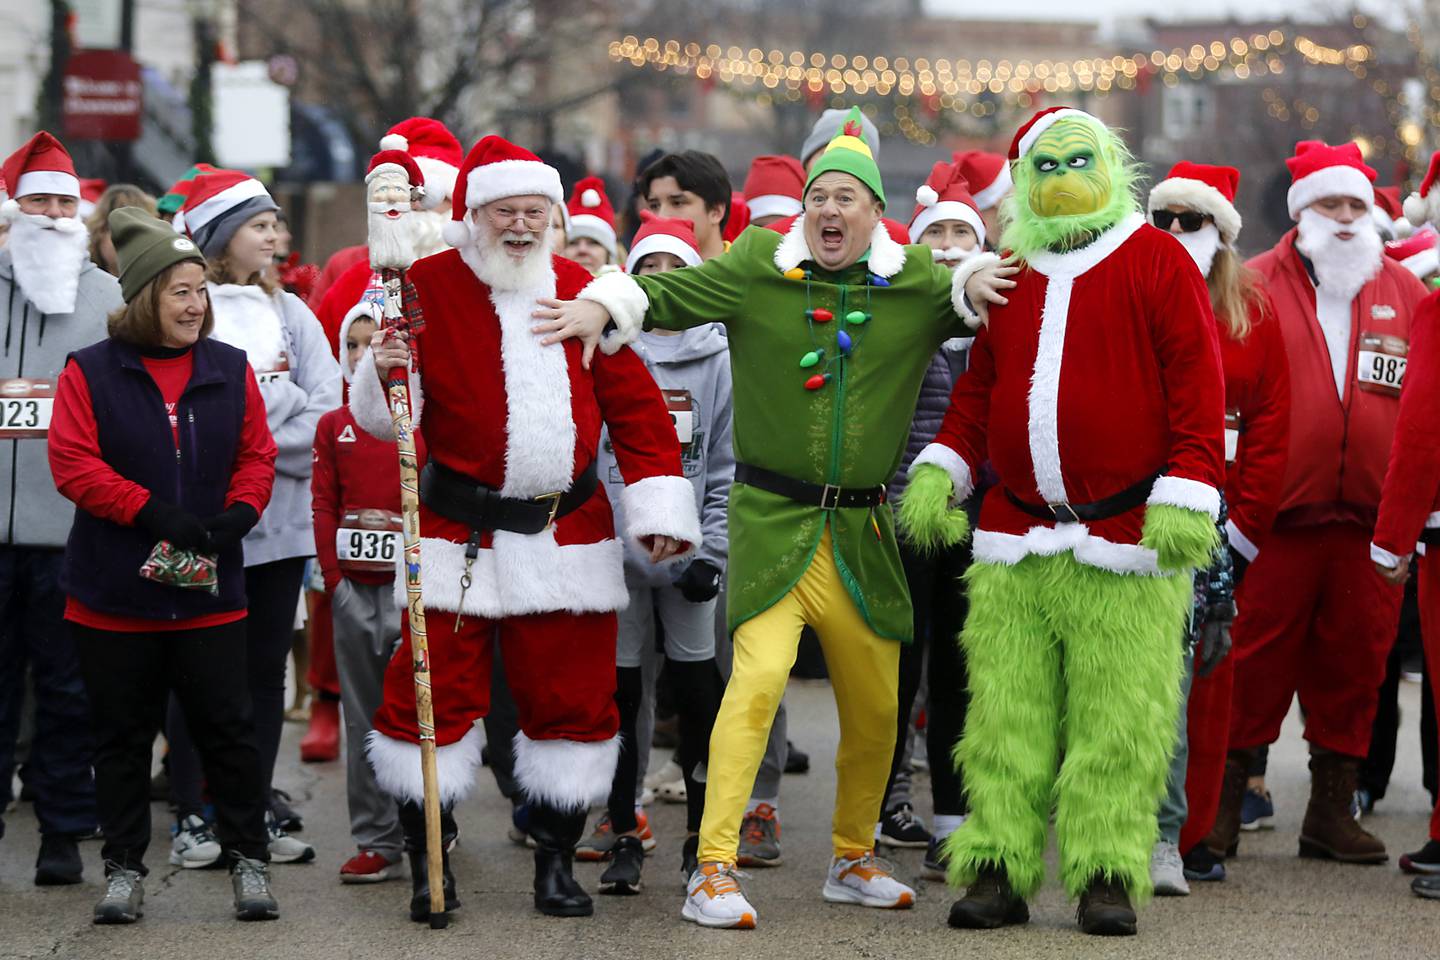 Chris Christensen, dressed as Buddy the Elf, jokingly separates Santa Claus and Russ Hyatt of Sundowner Entertainment, dressed as the Grinch before the start of the McHenry County Santa Run For Kids on Sunday morning, Dec. 3, 2023, in Downtown Crystal Lake. The annual event raises money for agencies in our county who work with children in need.